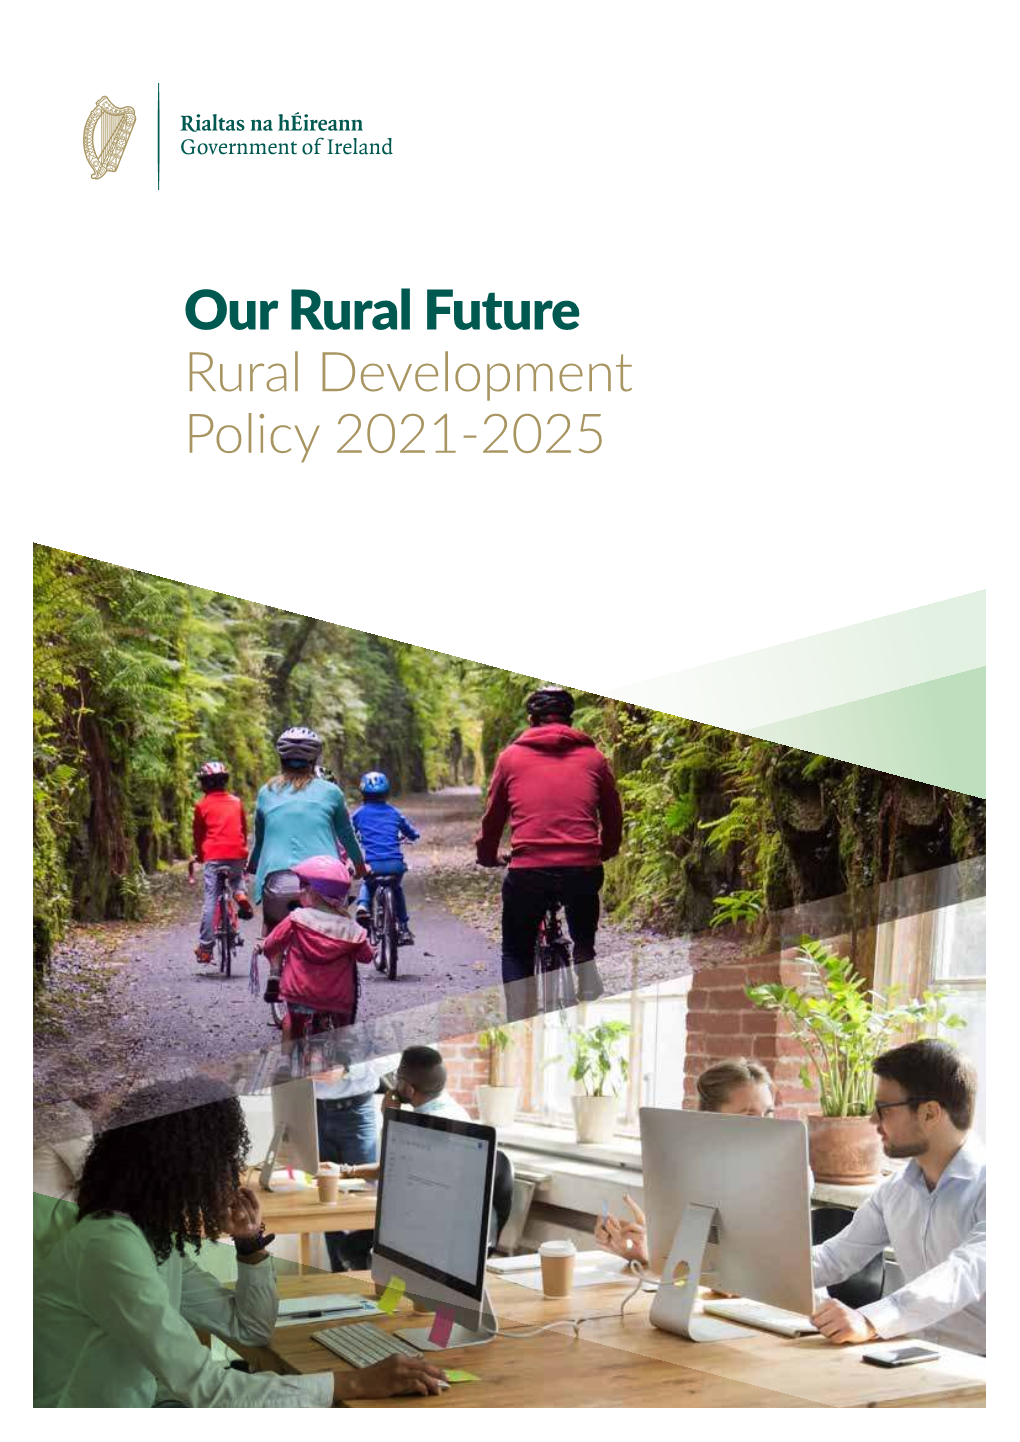 Our Rural Future Rural Development Policy 2021-2025